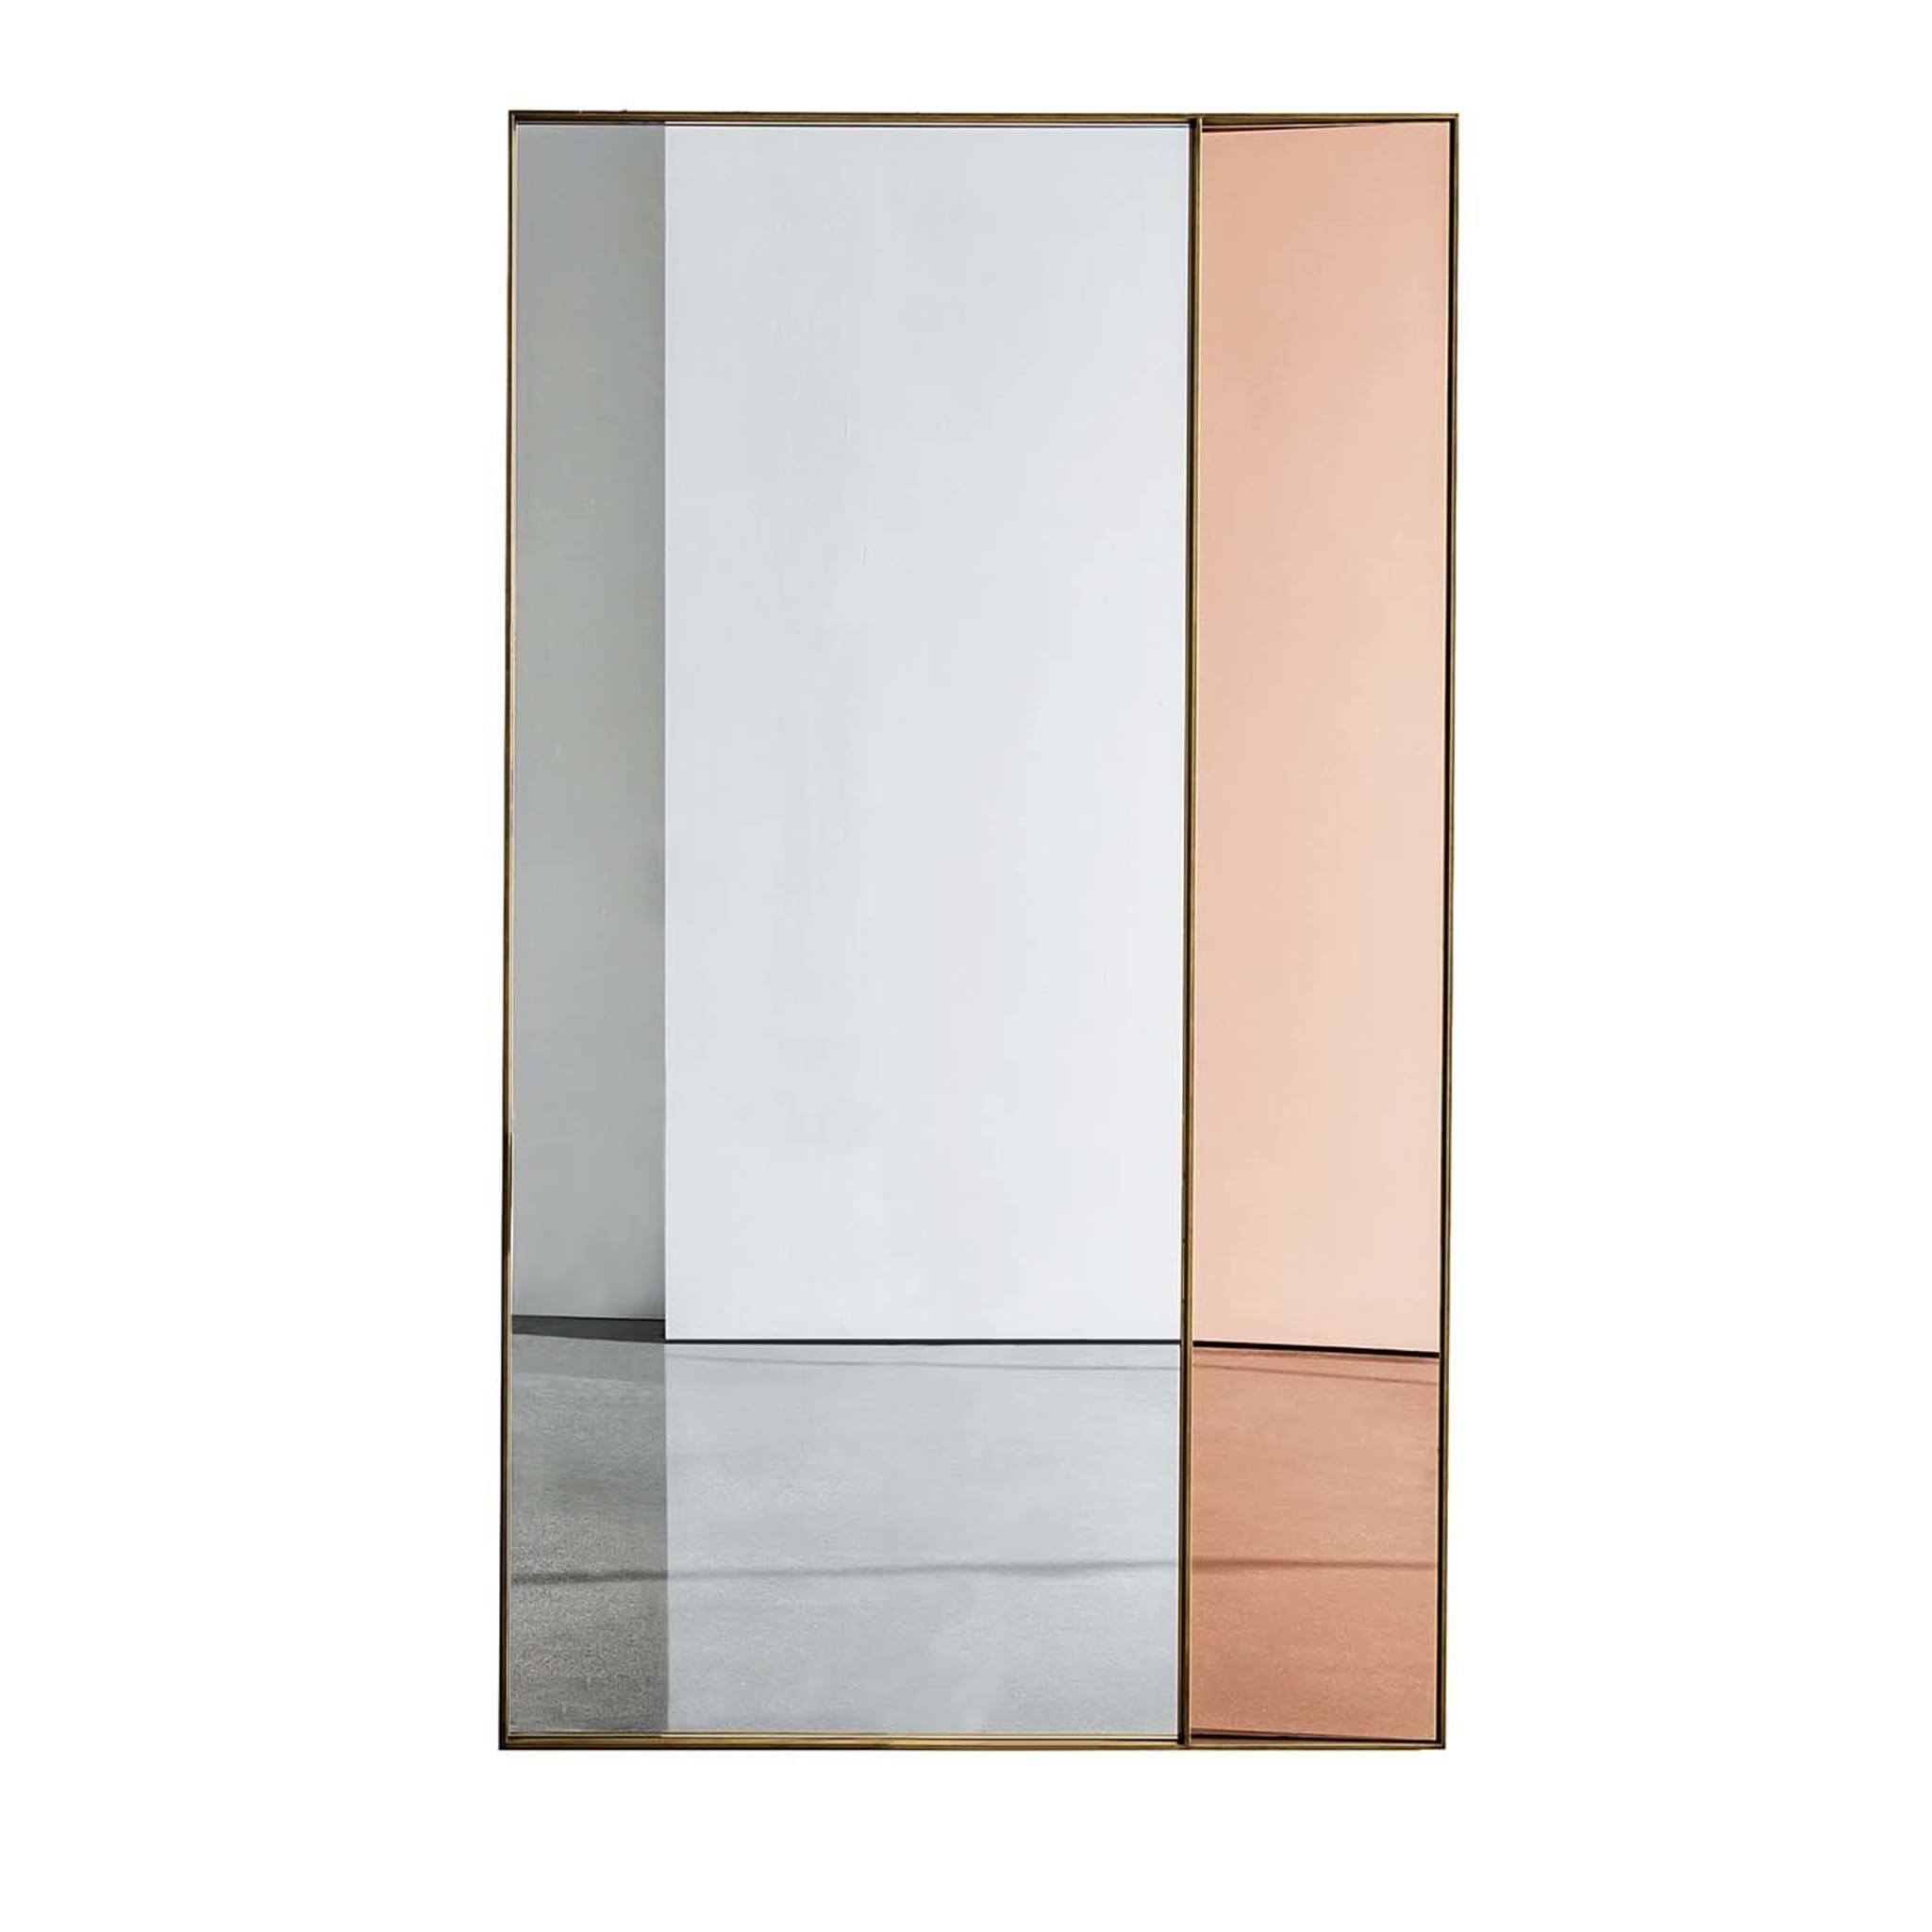 Campos Mirror in Extralight and Rose - Main view